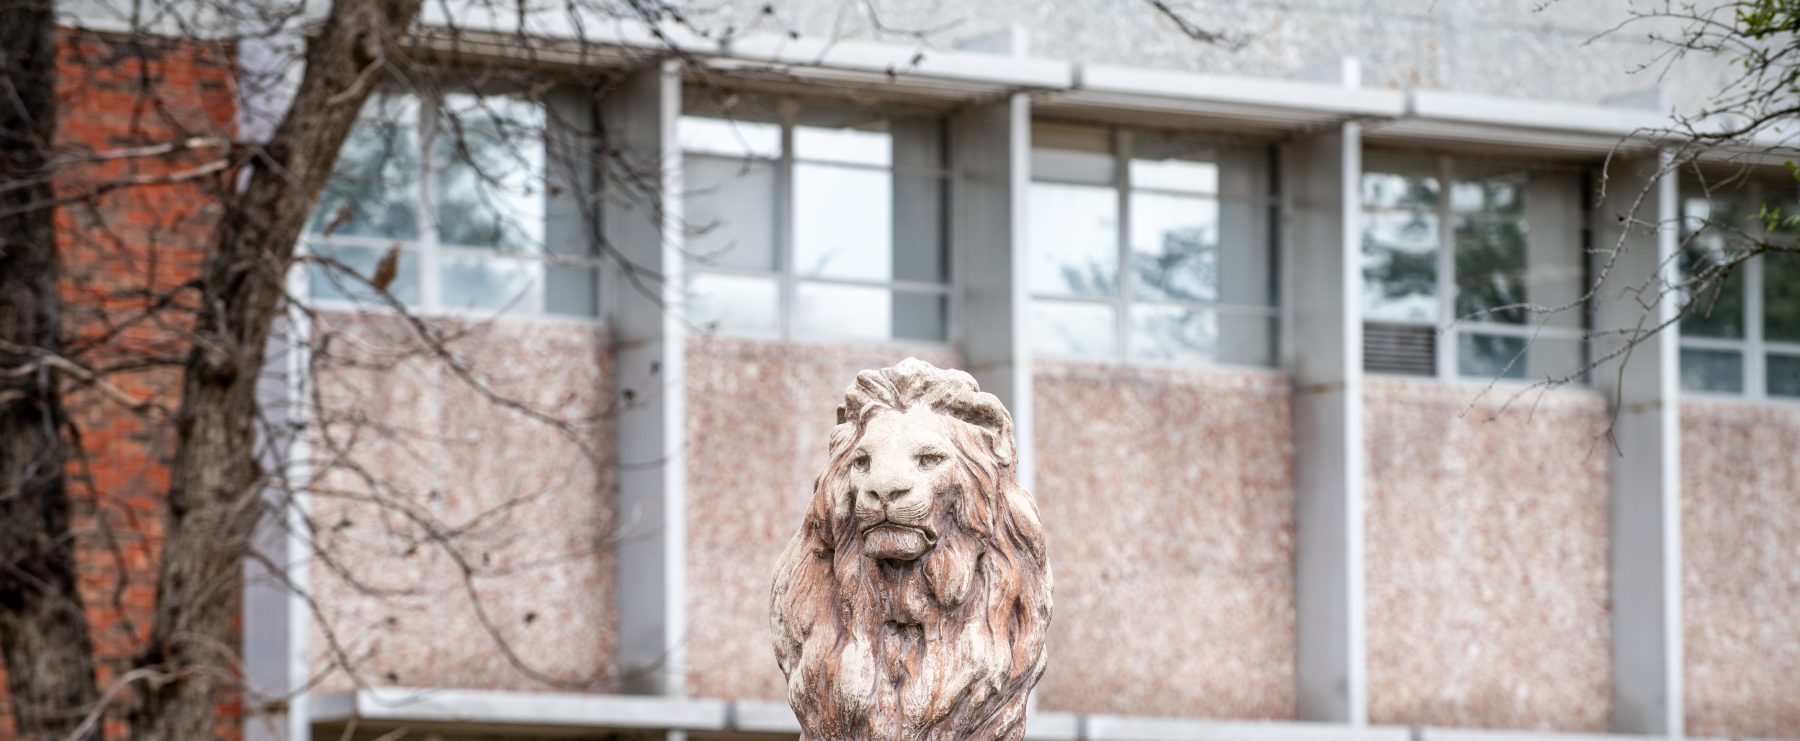 The lion statue in front of the library building.